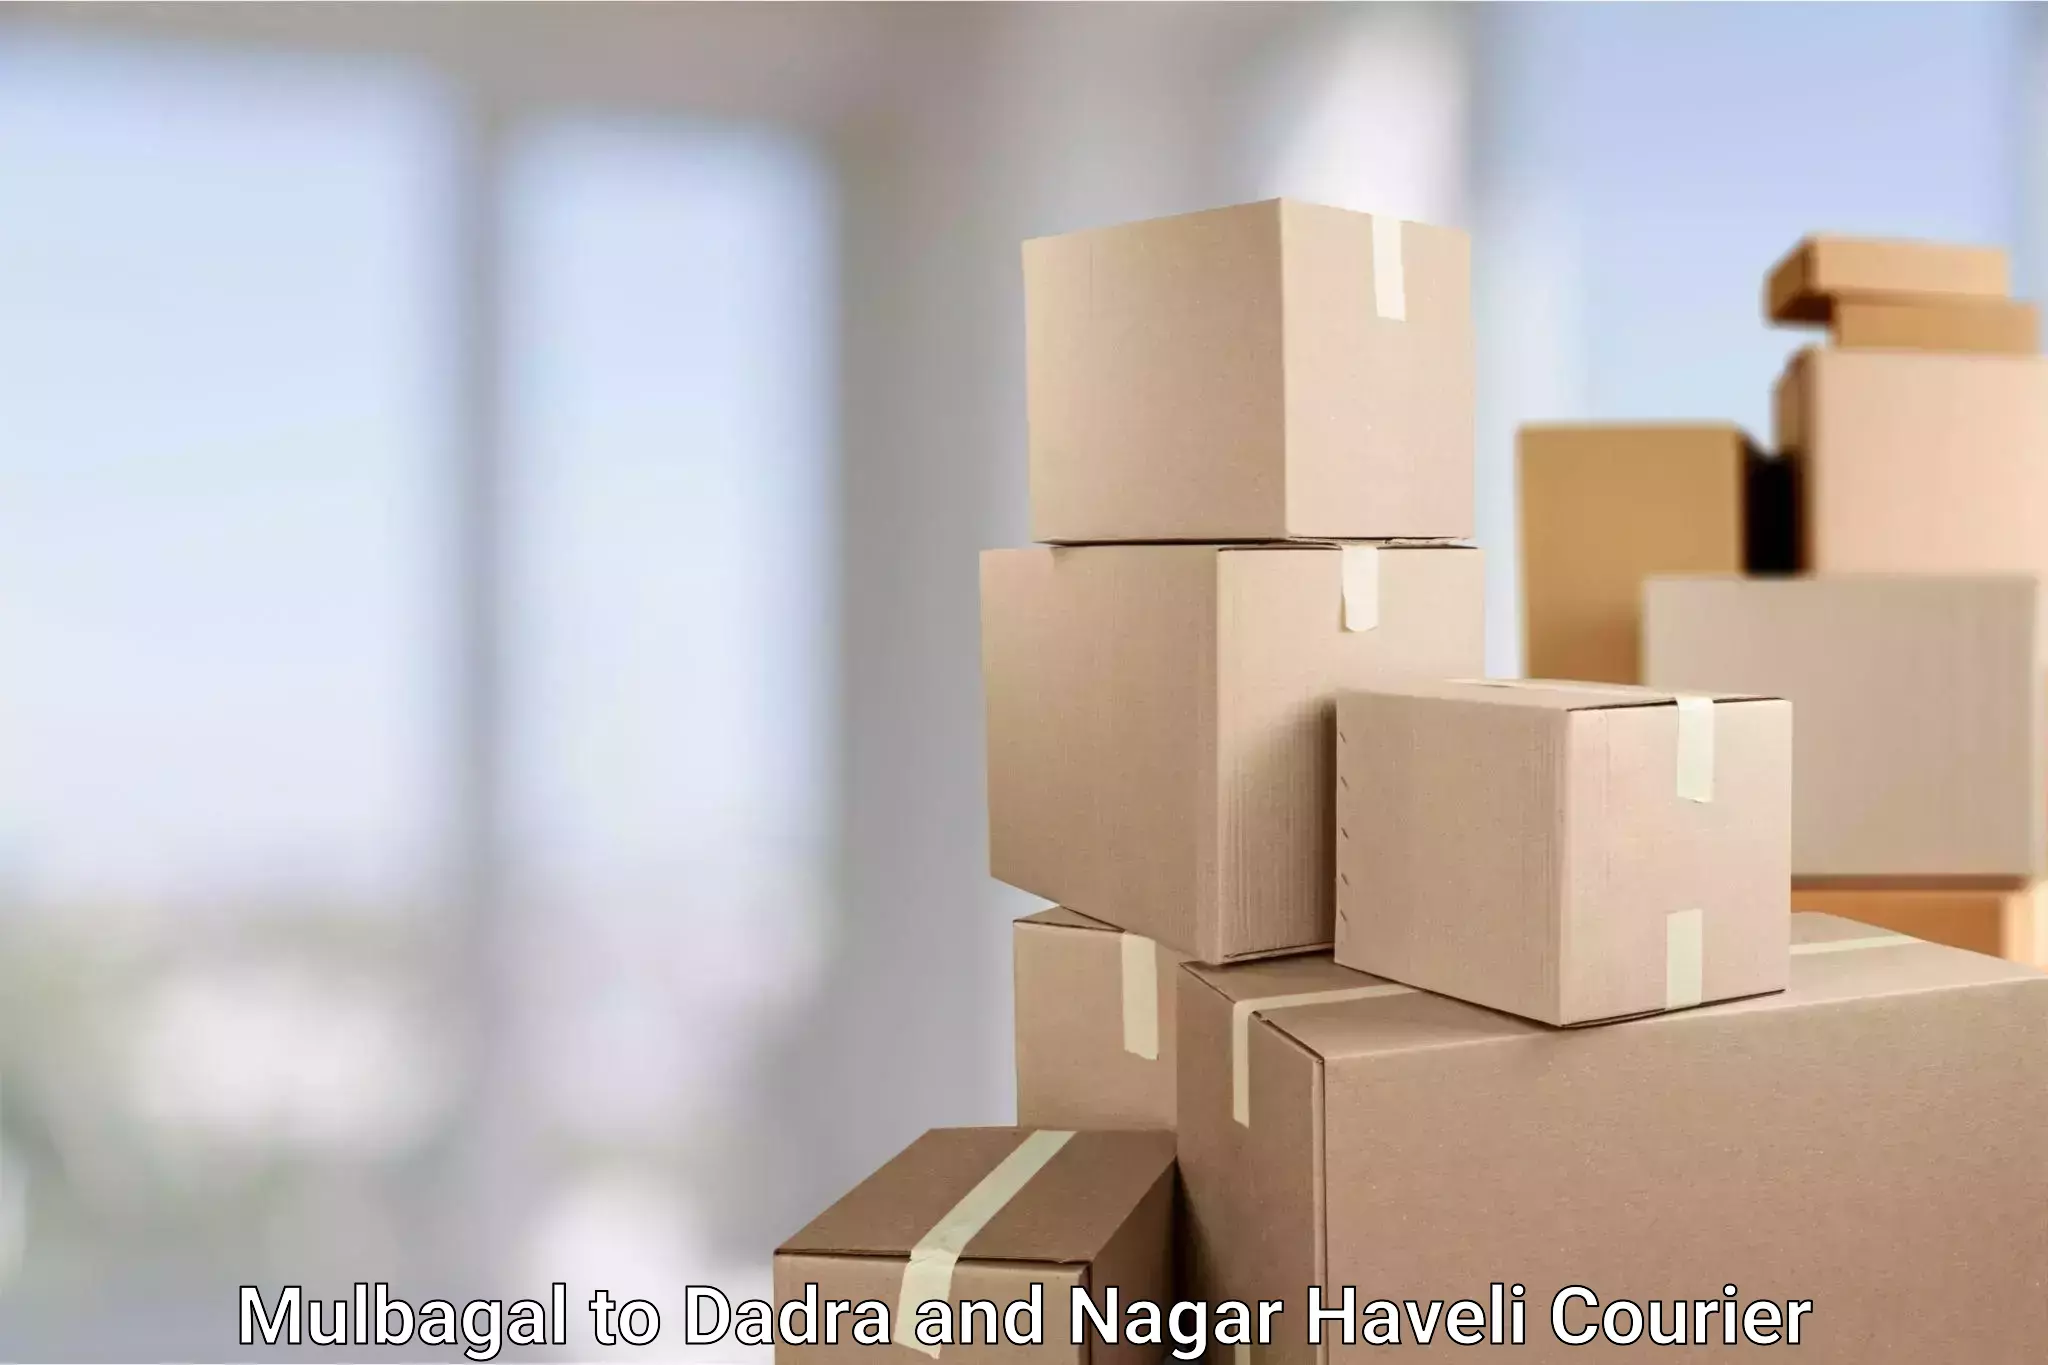 Full-service courier options Mulbagal to Dadra and Nagar Haveli